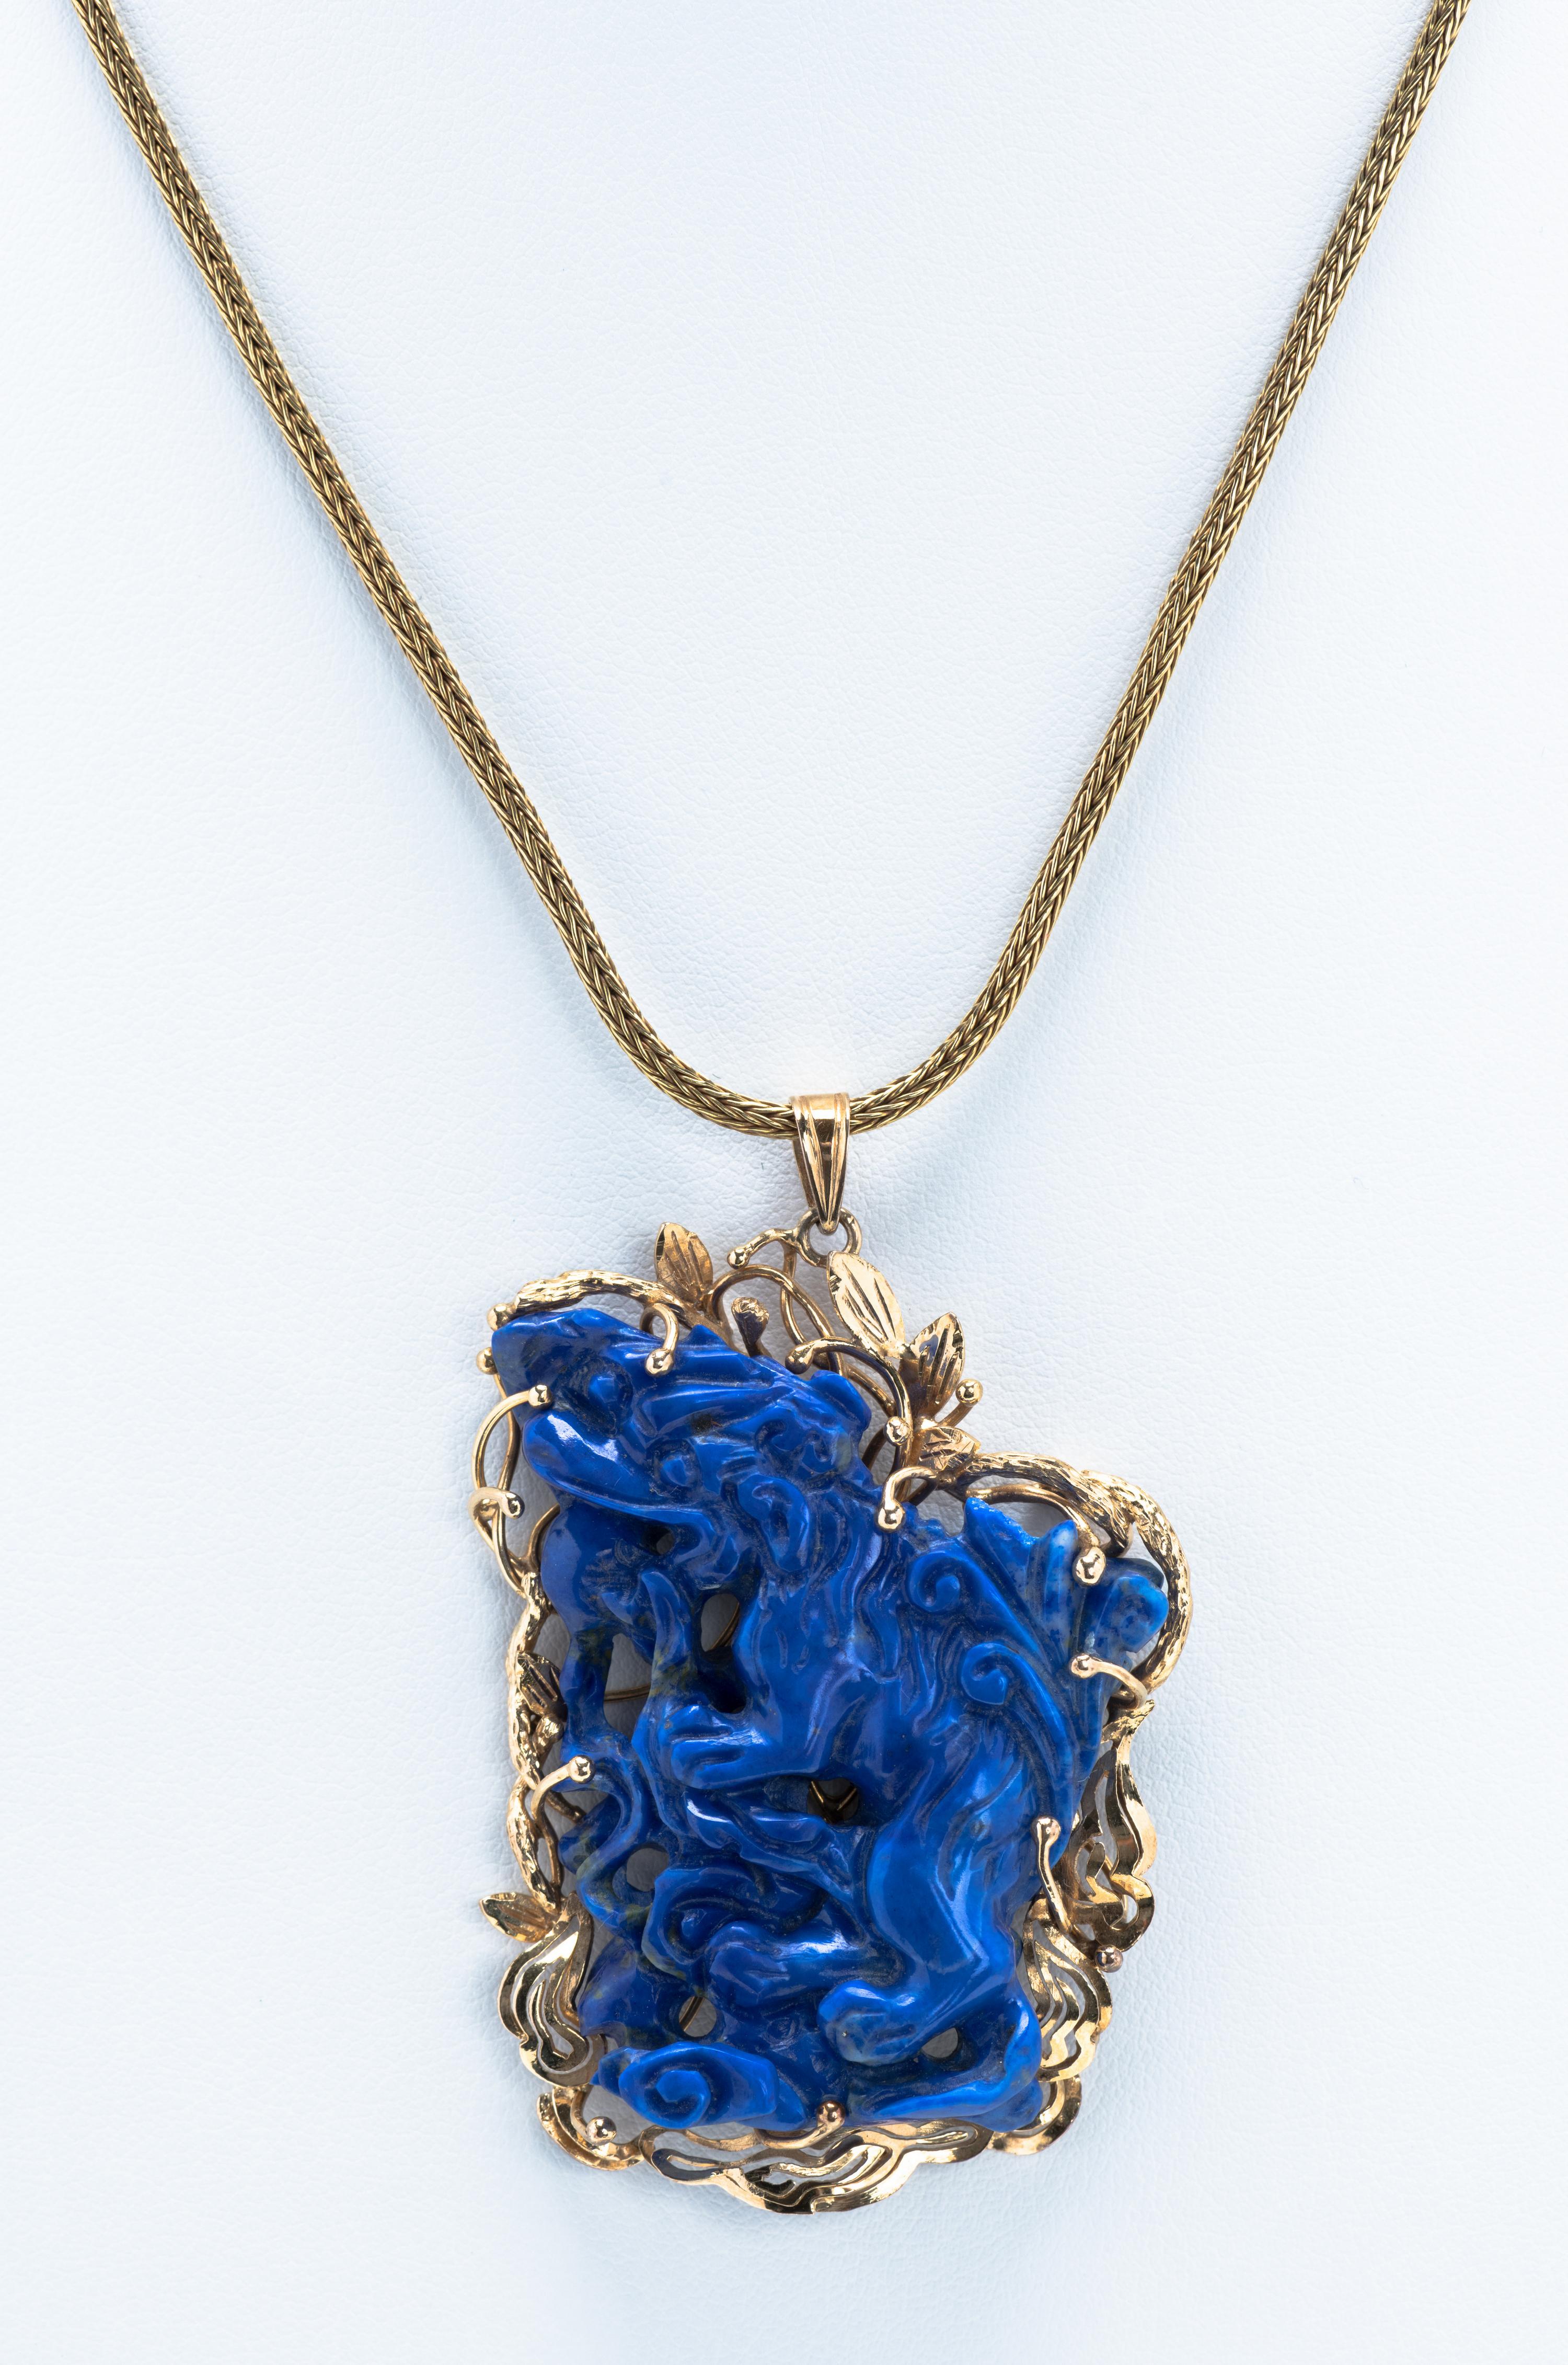 Carved lapis lazuli allegorical lion pendant set in 14 karat gold.

Note: Chain not included.

Size: L 2.25